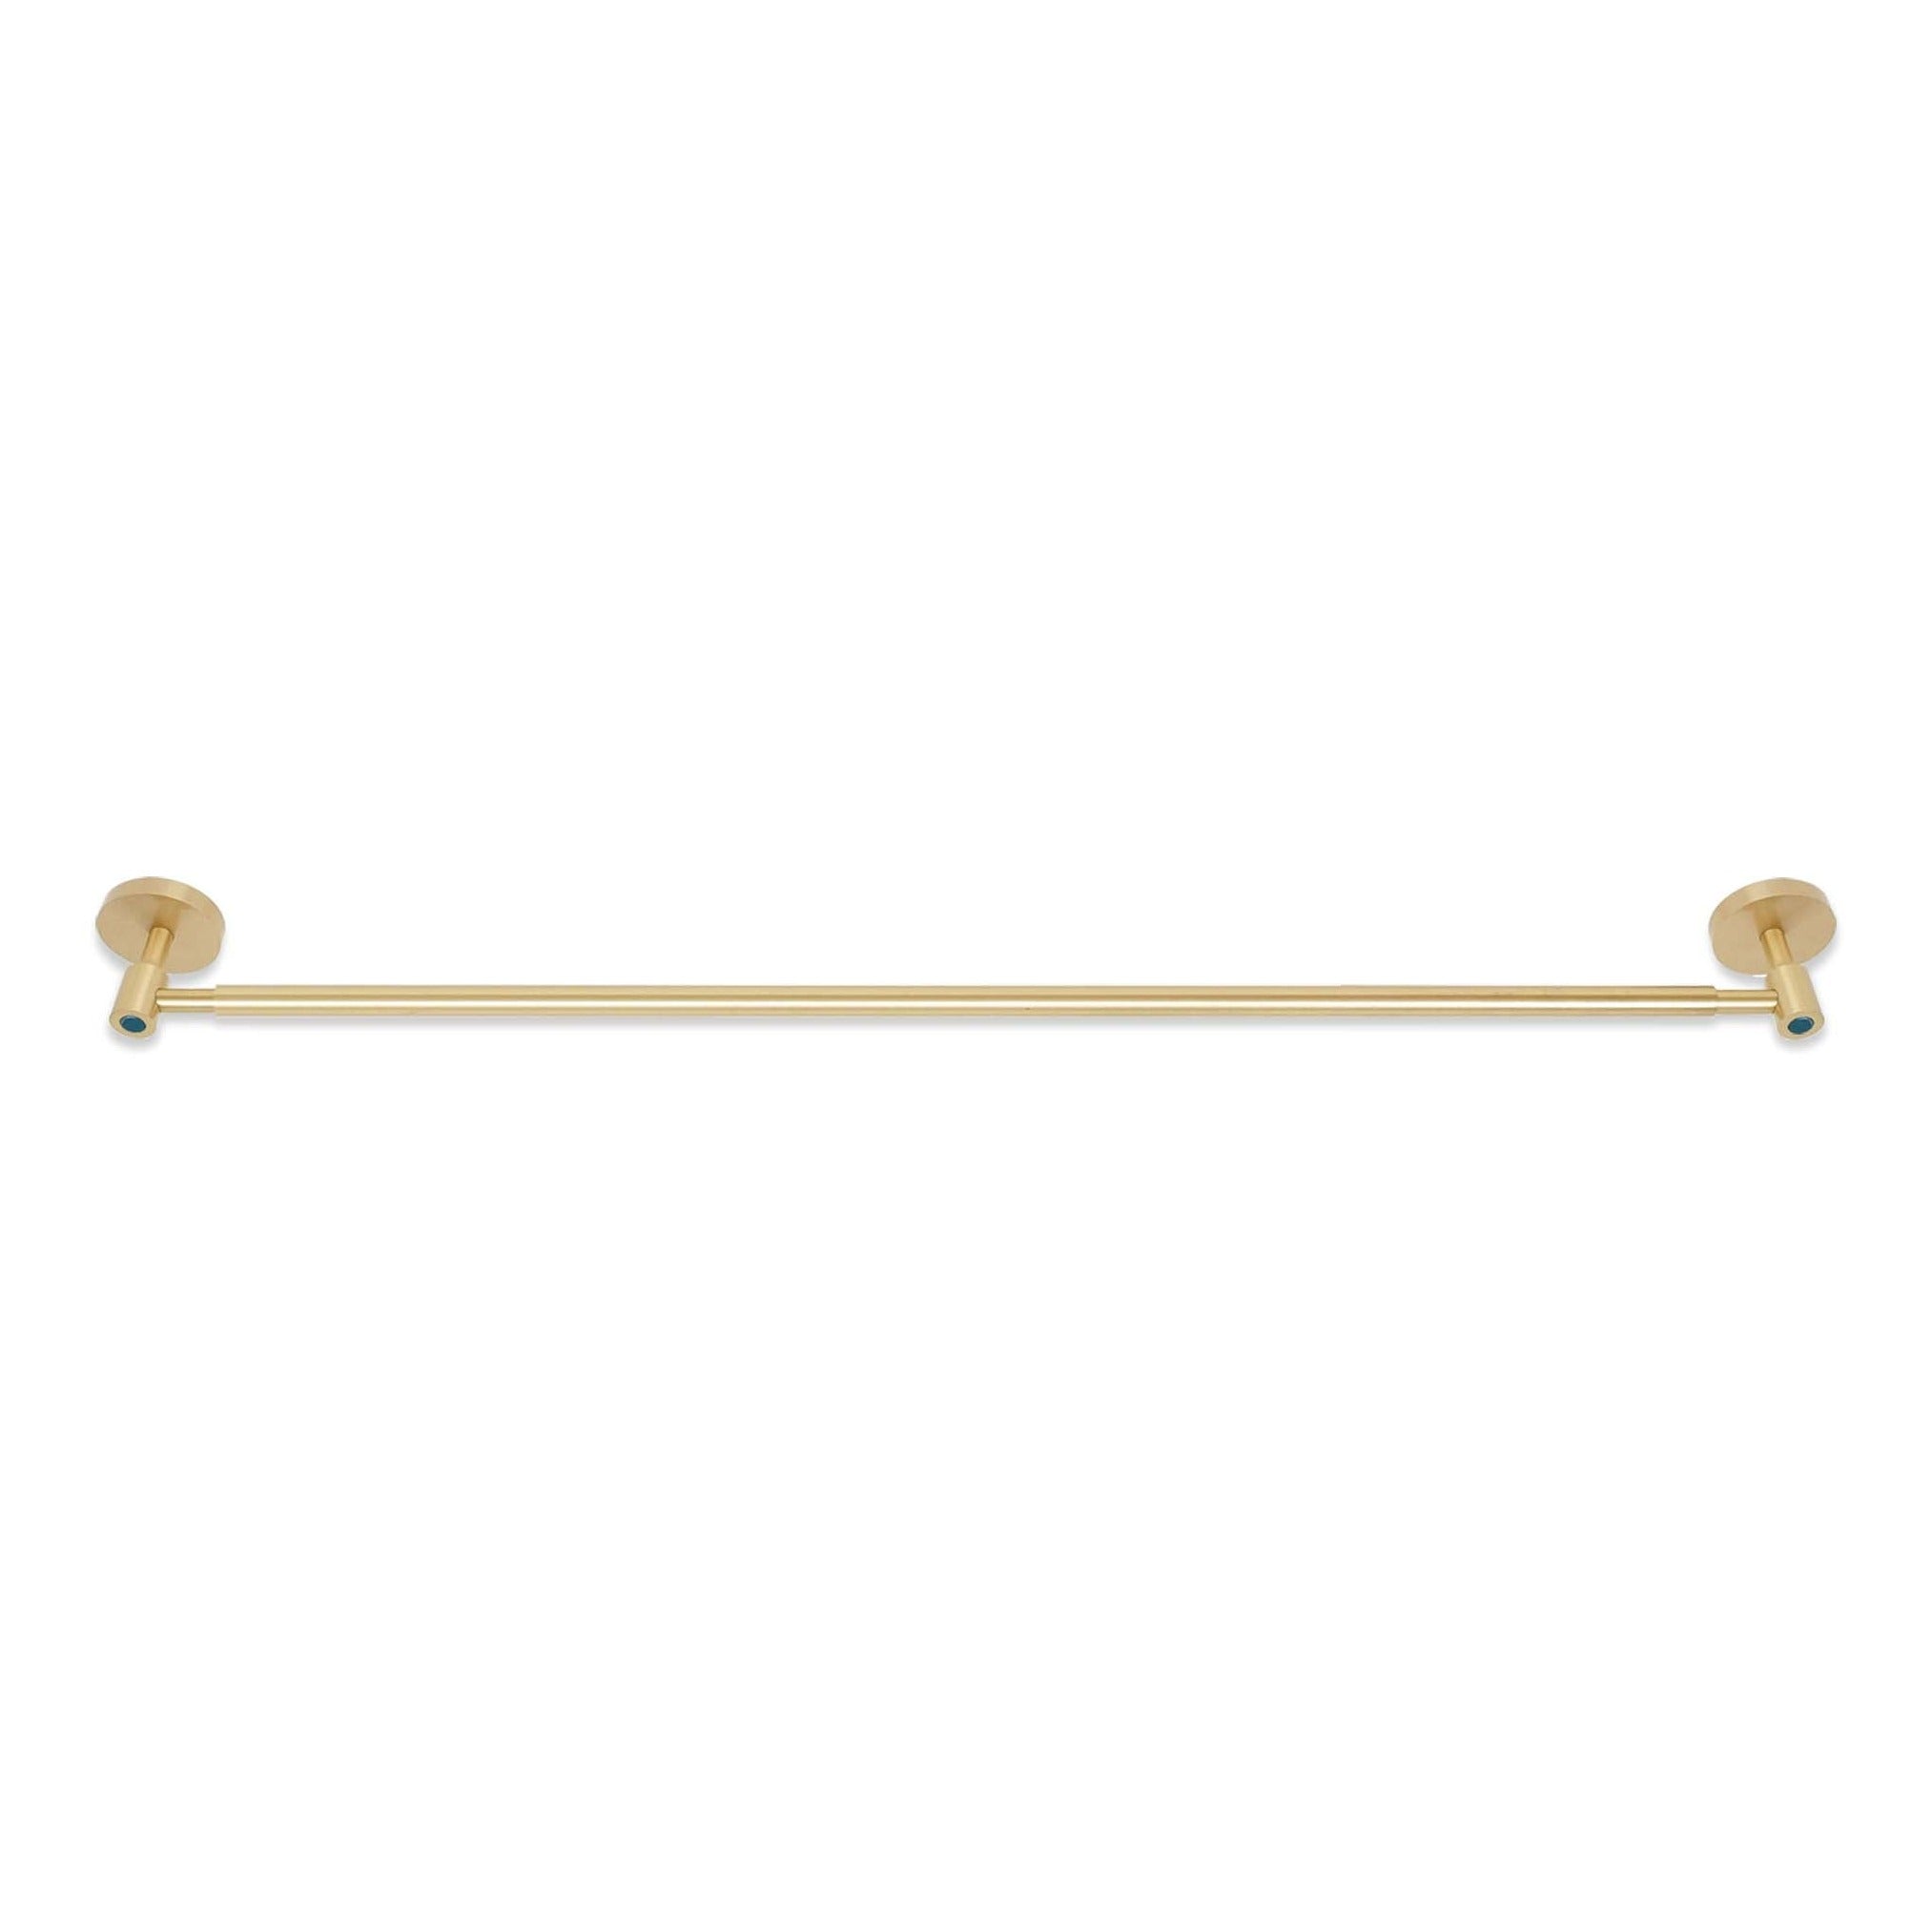 Brass and slate blue color Head towel bar 24" Dutton Brown hardware